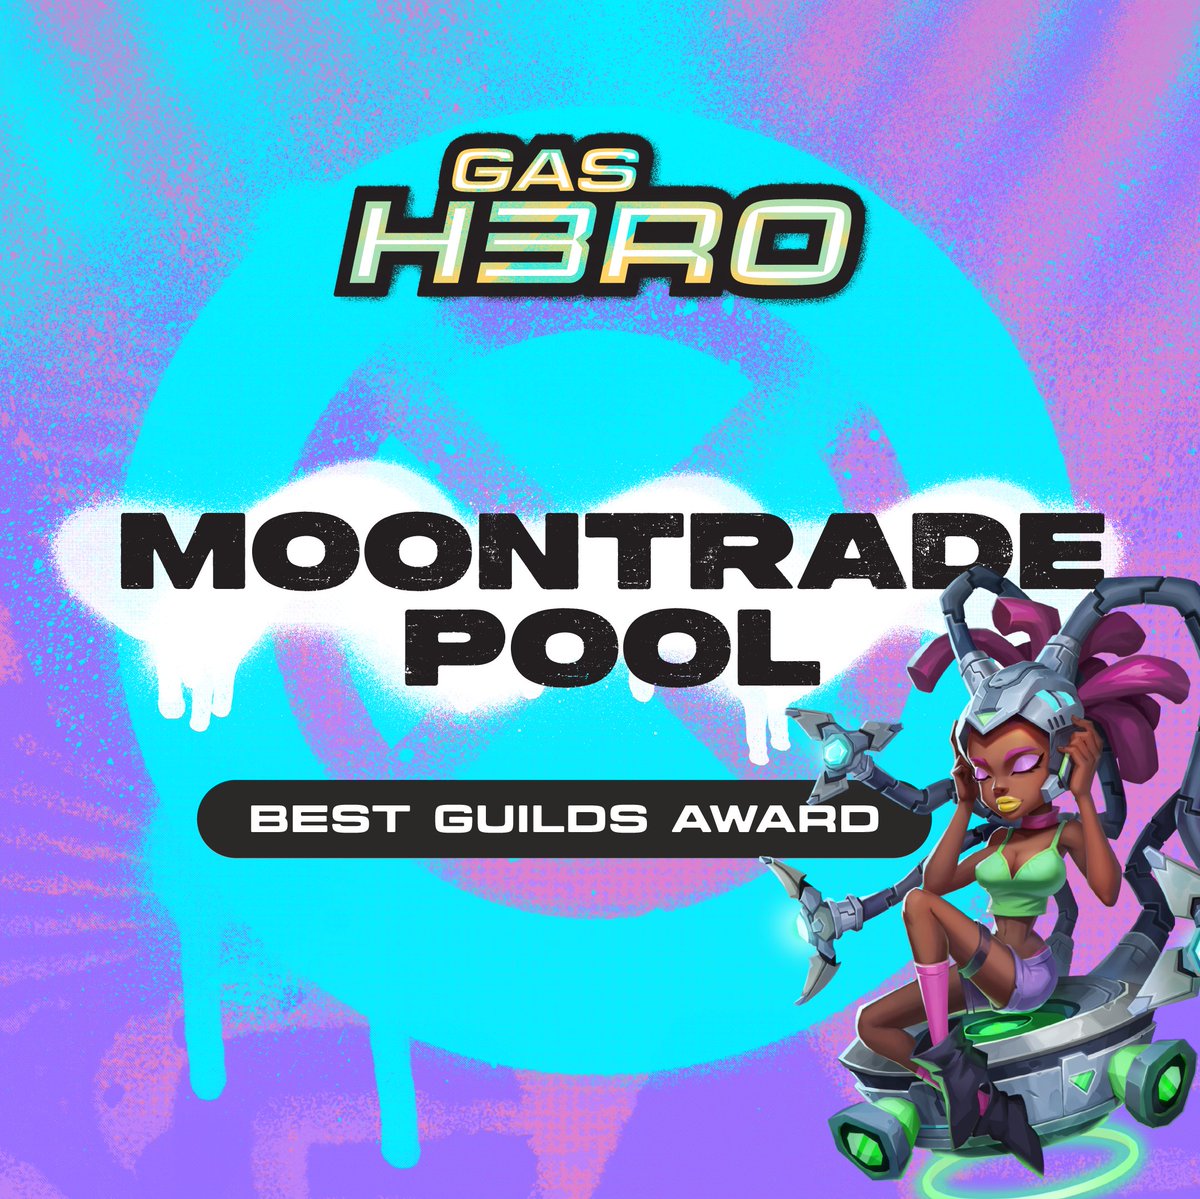 What's next for the Moontrade pool? Introducing: The Best Guilds Award! 🌟 We're excited to reveal that the #GasHero Moontrade pool will now reward outstanding guilds who've gone above and beyond in organizing and motivating their members. It's time to celebrate their…